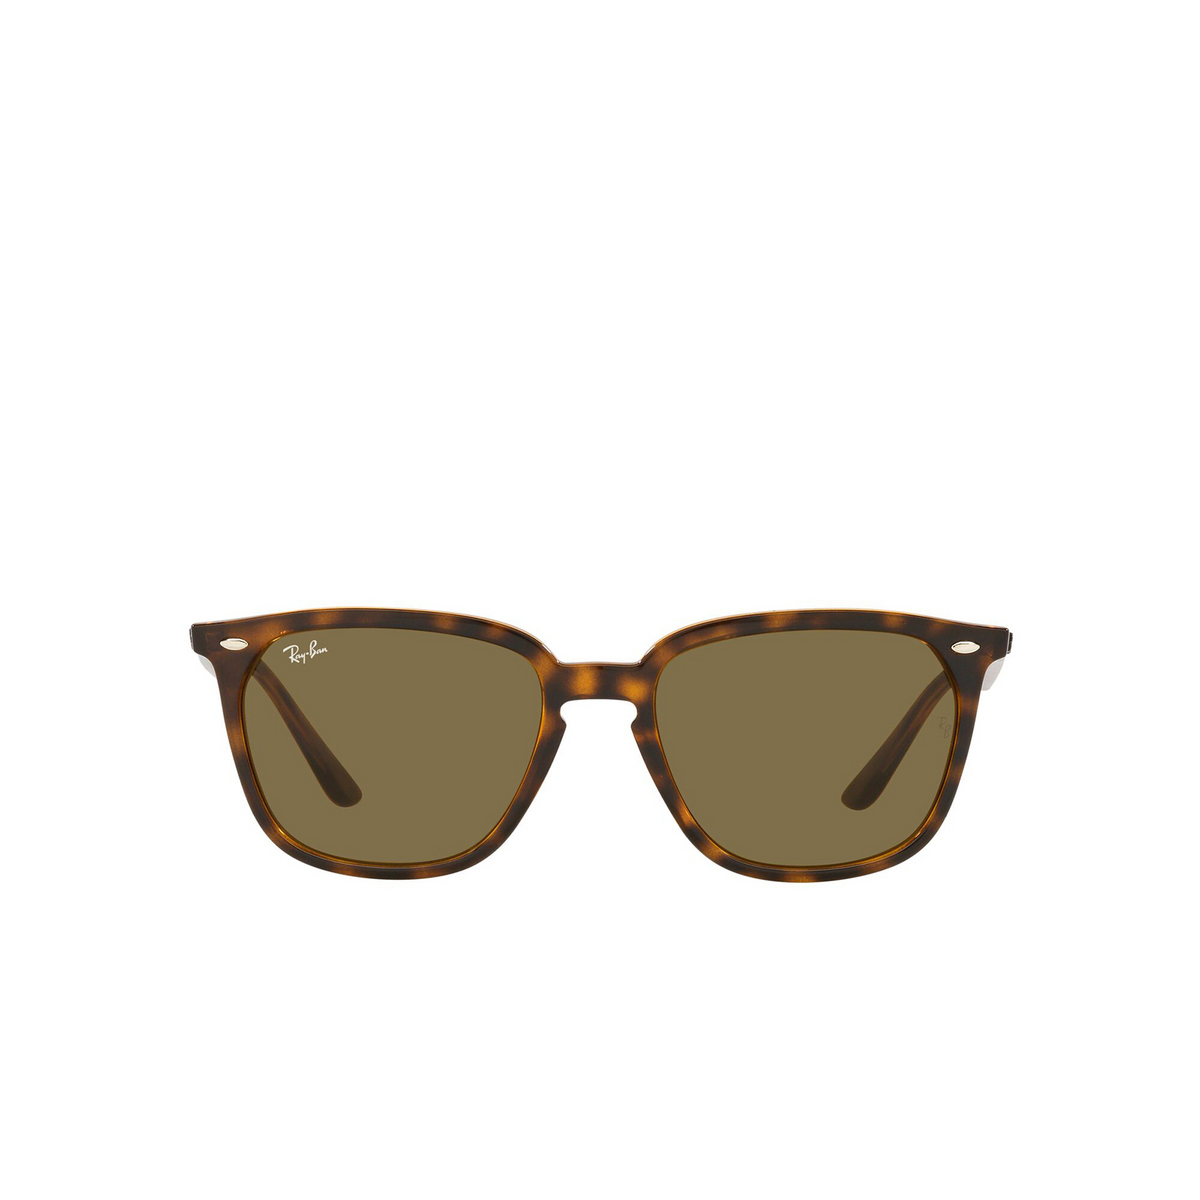 Ray-Ban RB4362 Sunglasses 710/73 Havana - front view